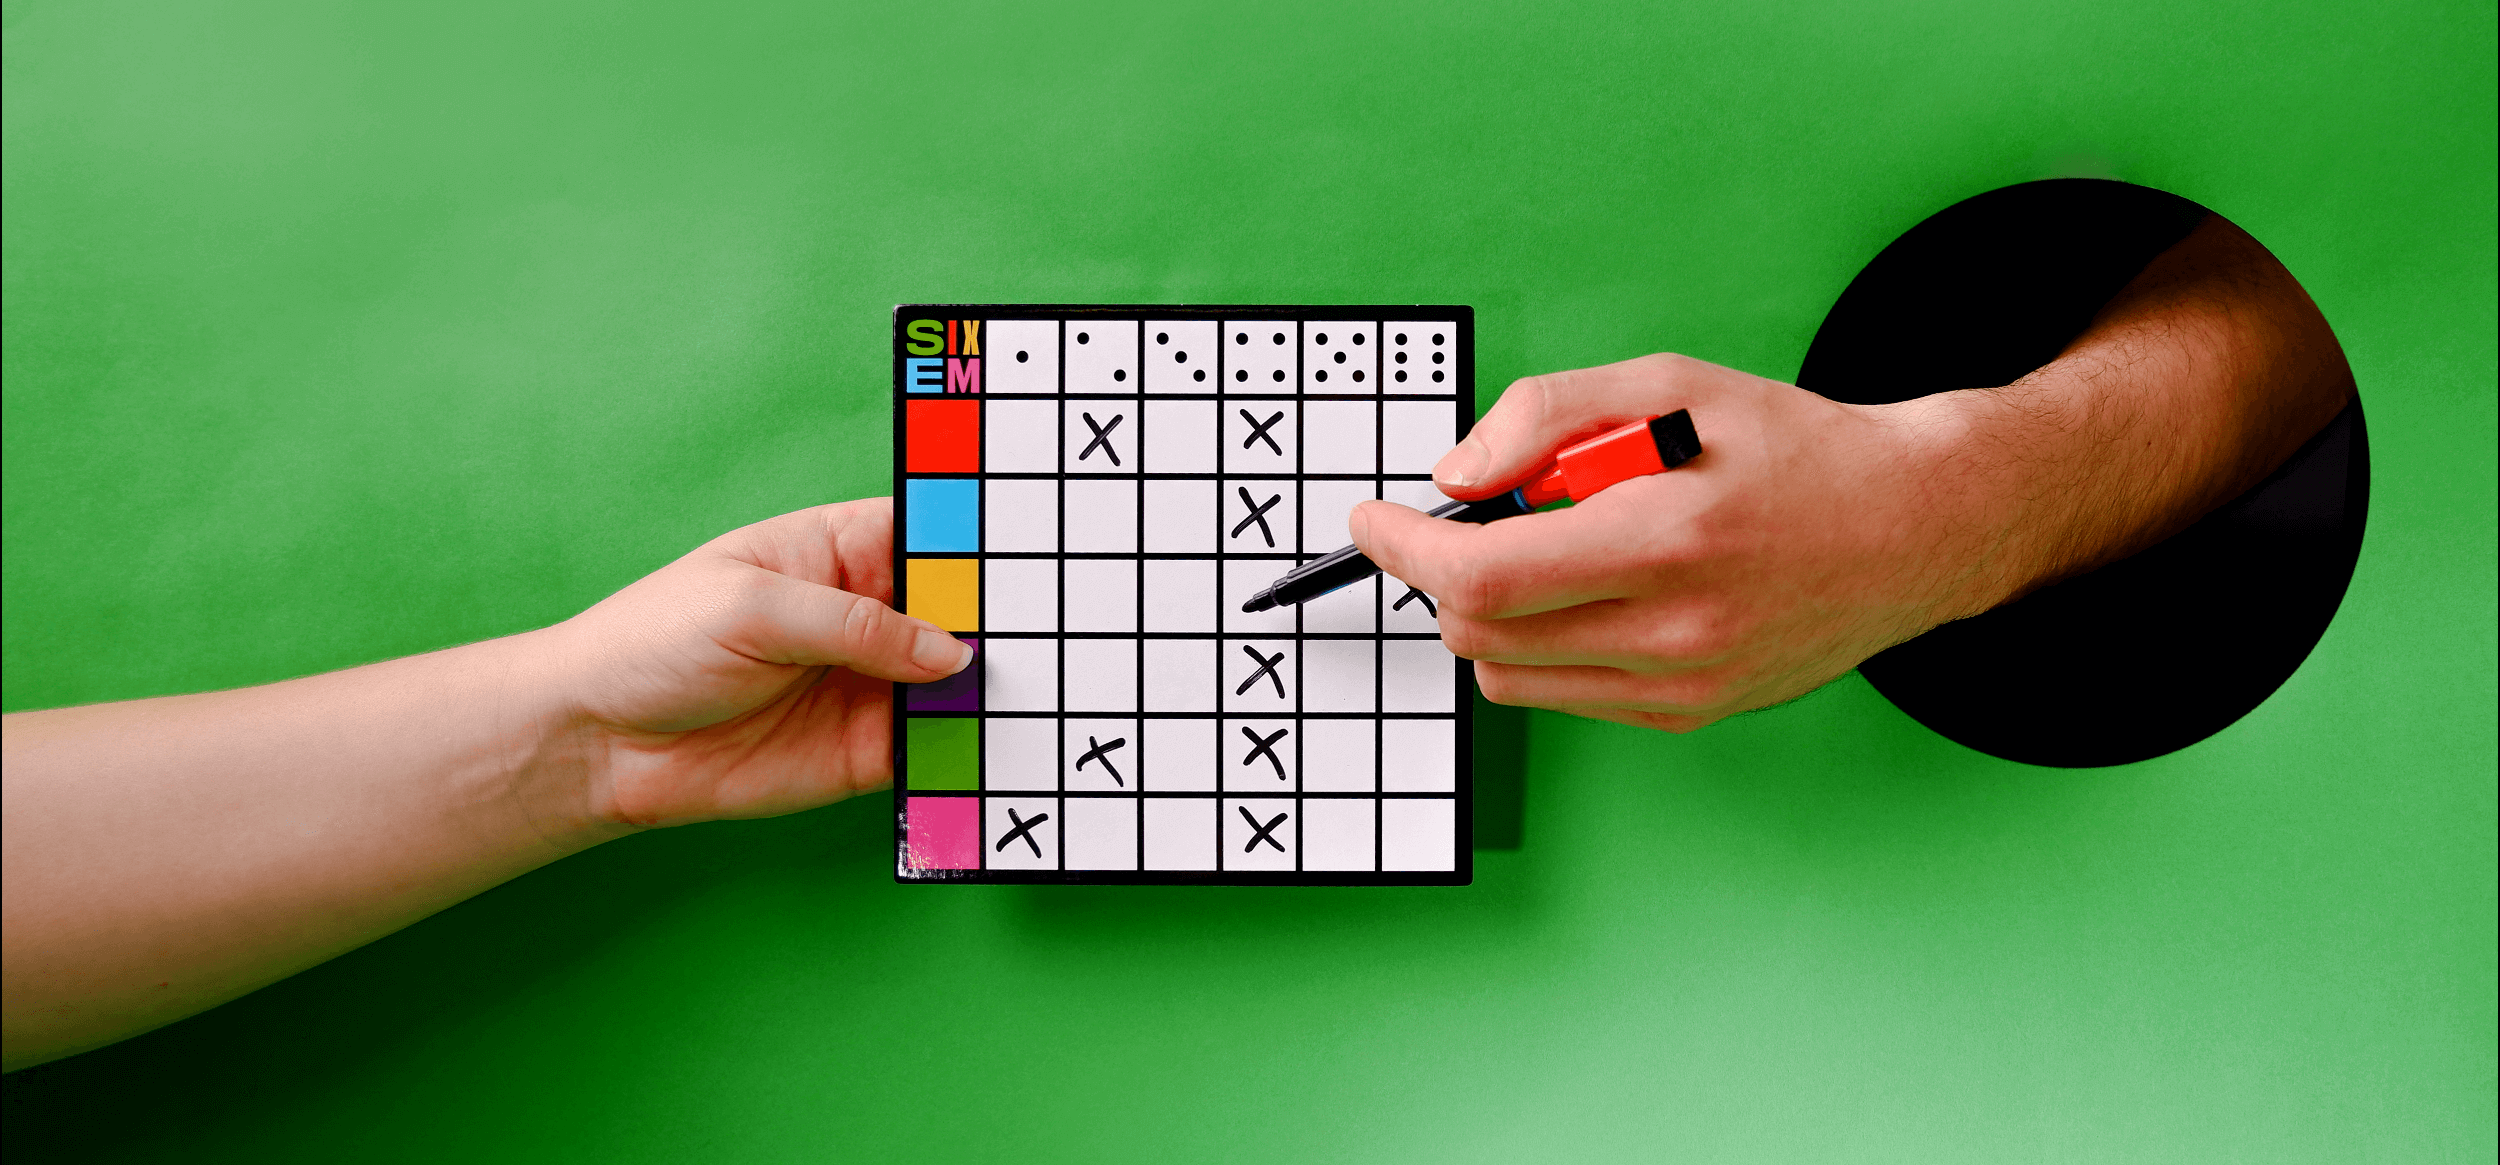 SIXEM dry erase board being held in the center of the image by one arm coming in from the left while another sticks out from a hole in the green background while holding a marker